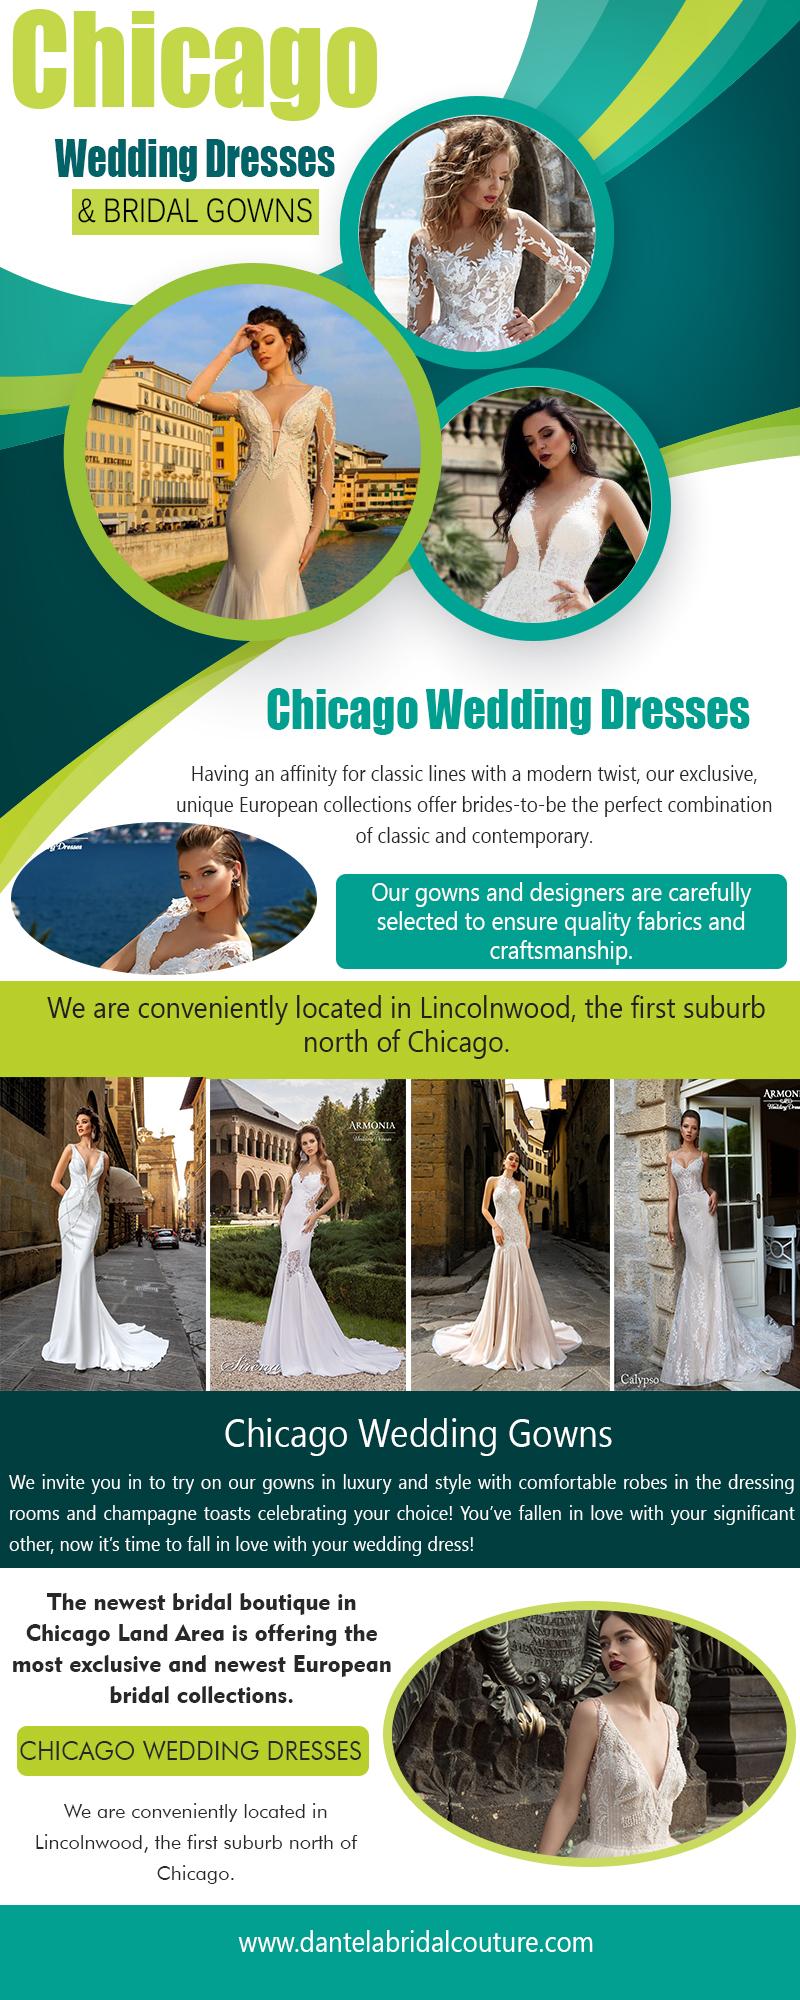 Chicago Wedding Dresses & Bridal Gowns